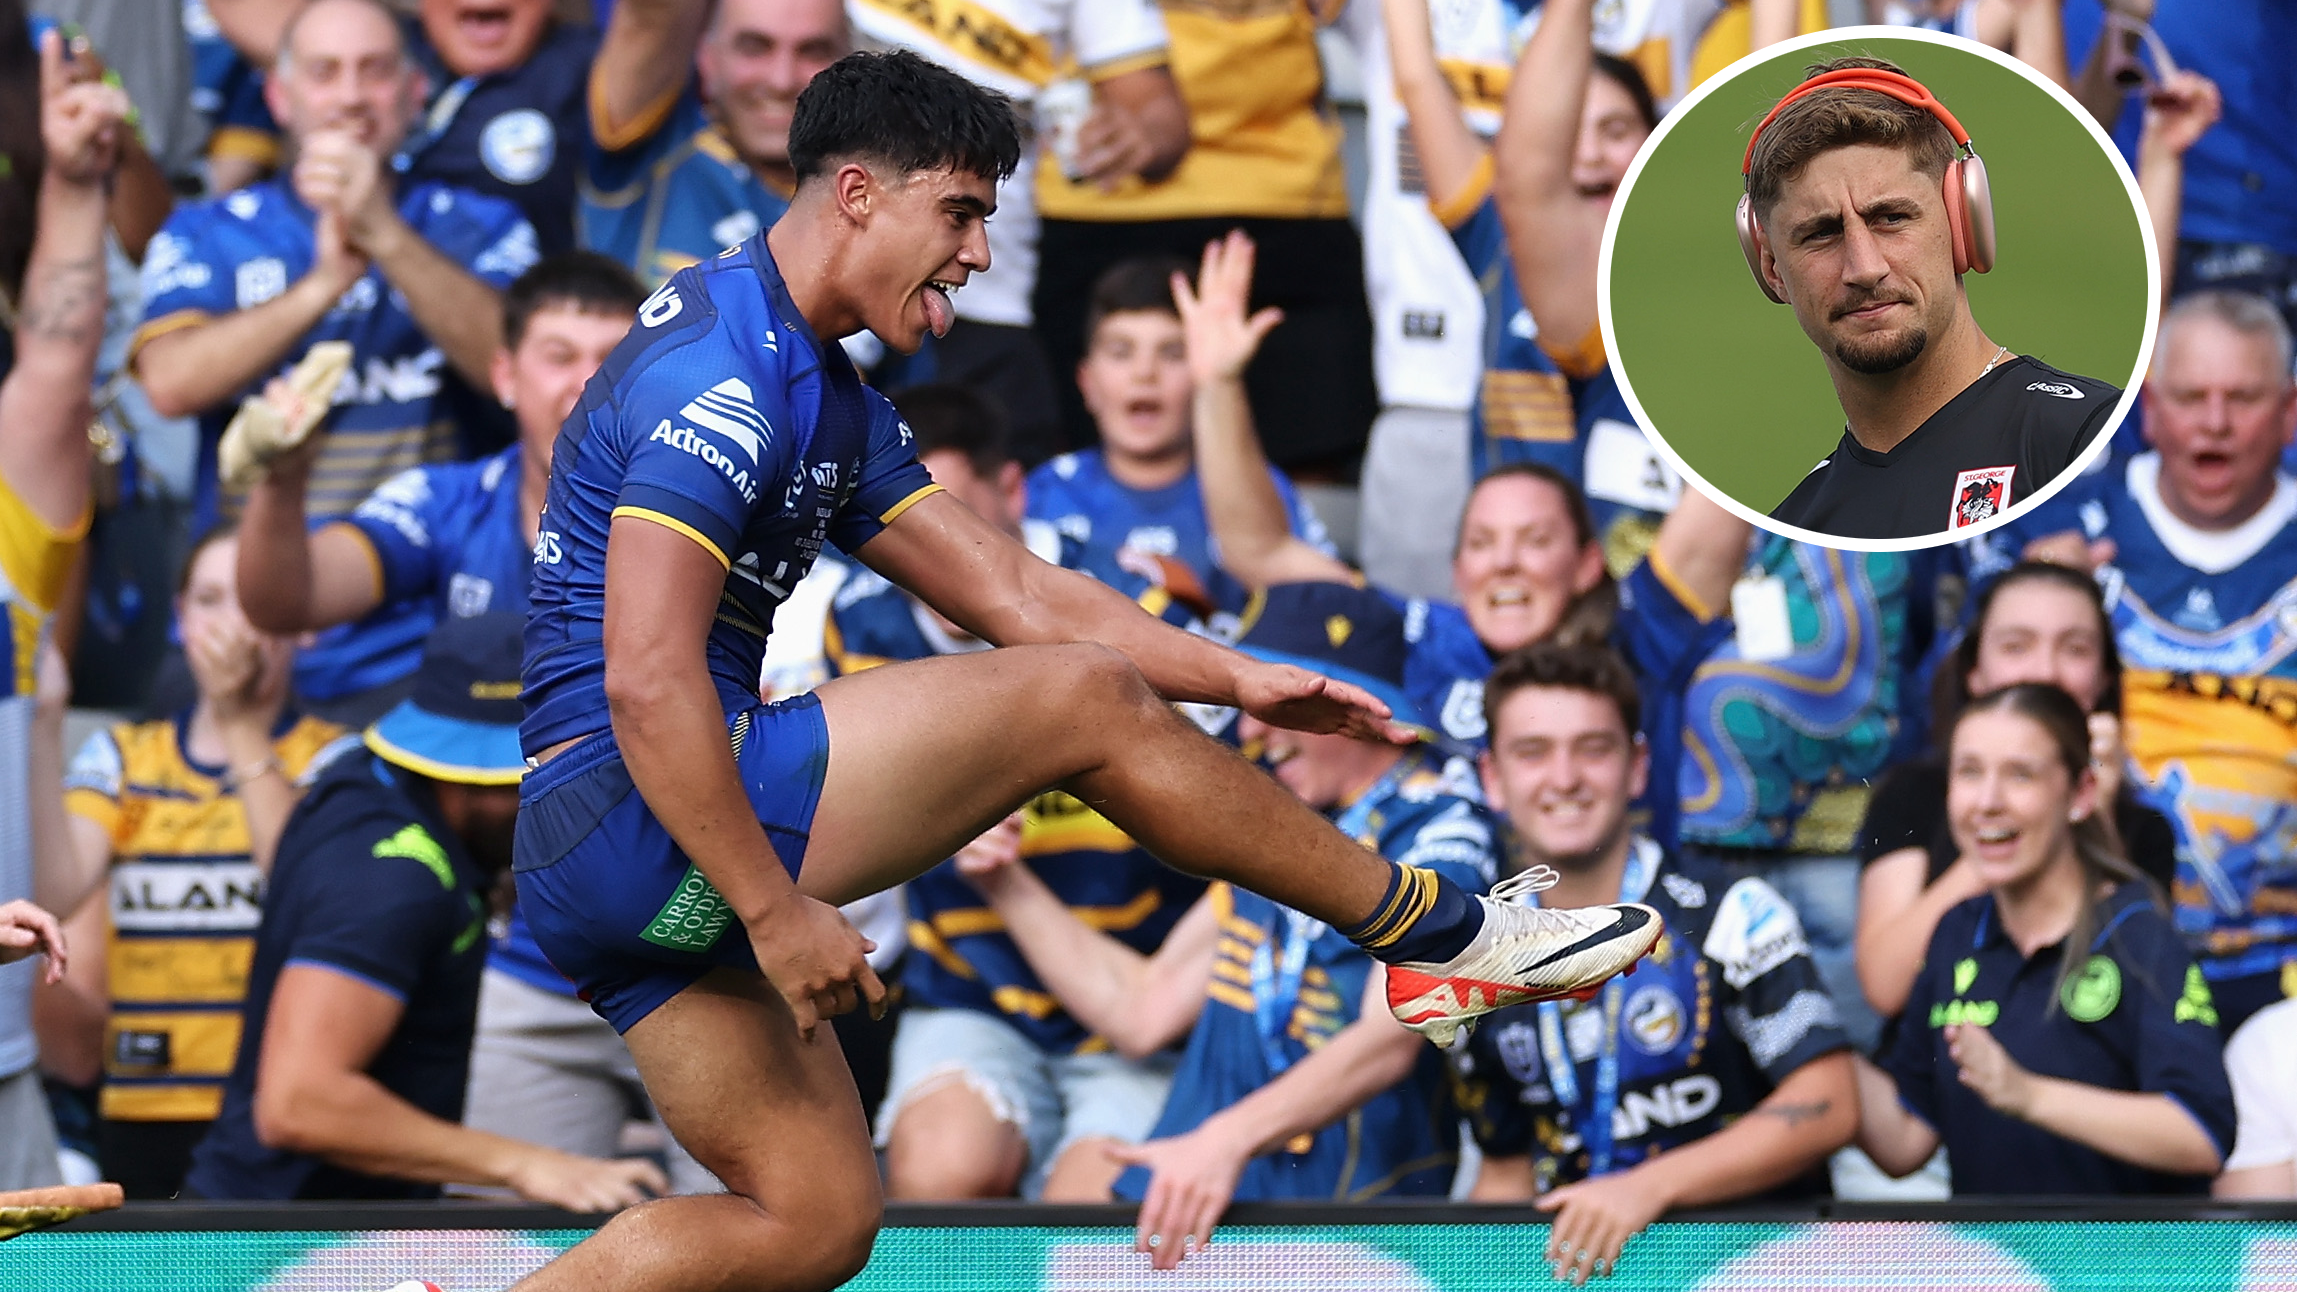 Parramatta rookie Blaize Talagi's eye-catching debut puts an end to Zac Lomax speculation